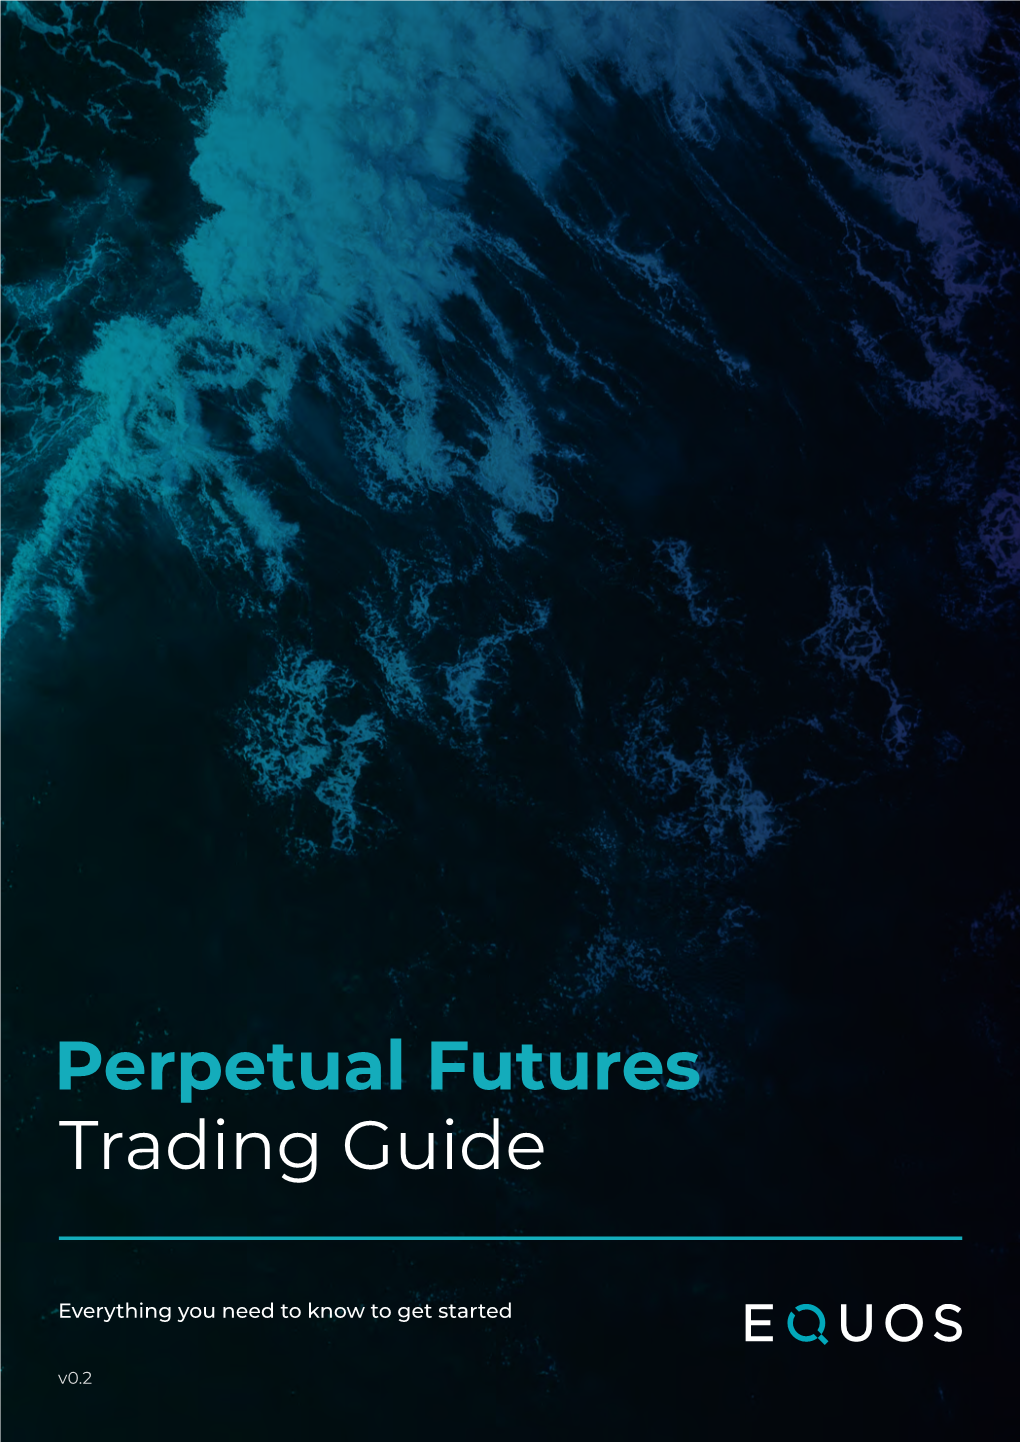 Trading Guide Perpetual Futures